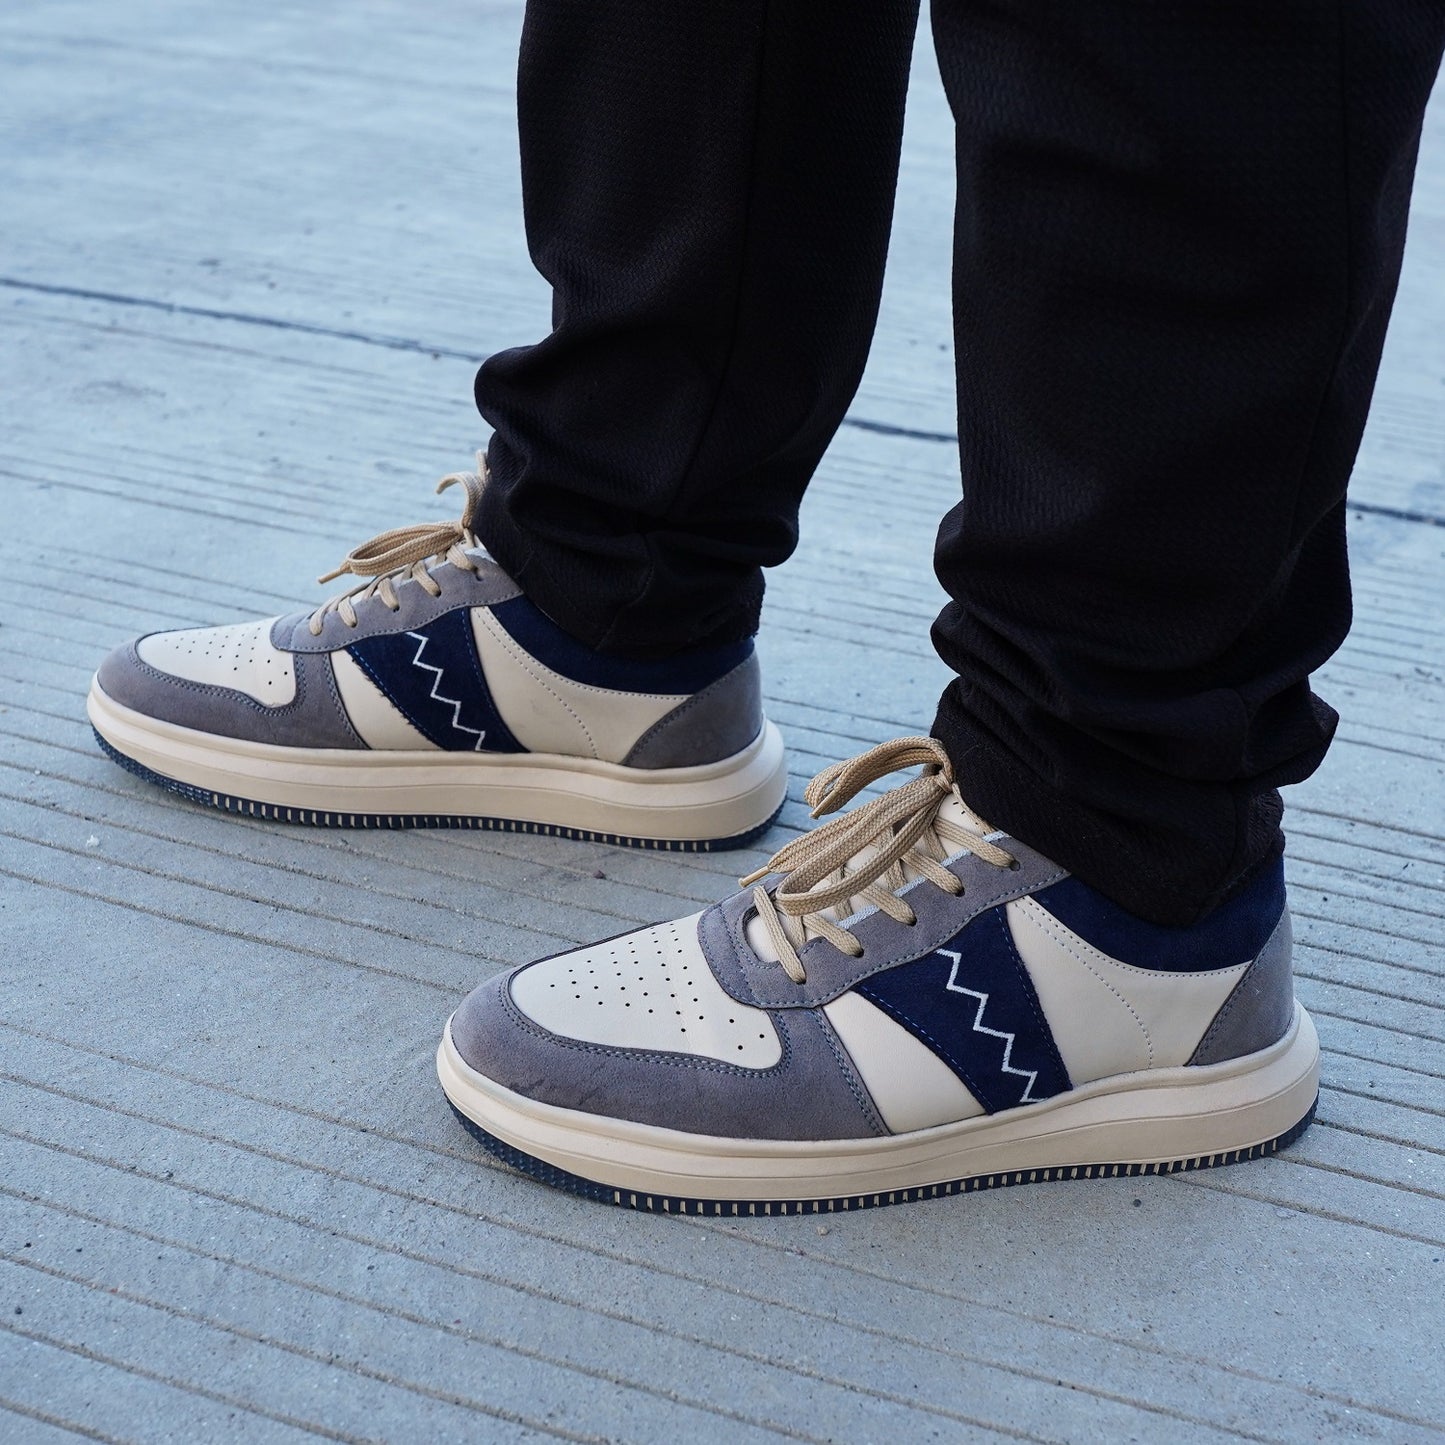 The Aurous Zion Laceup Sneakers - Creamy Blue